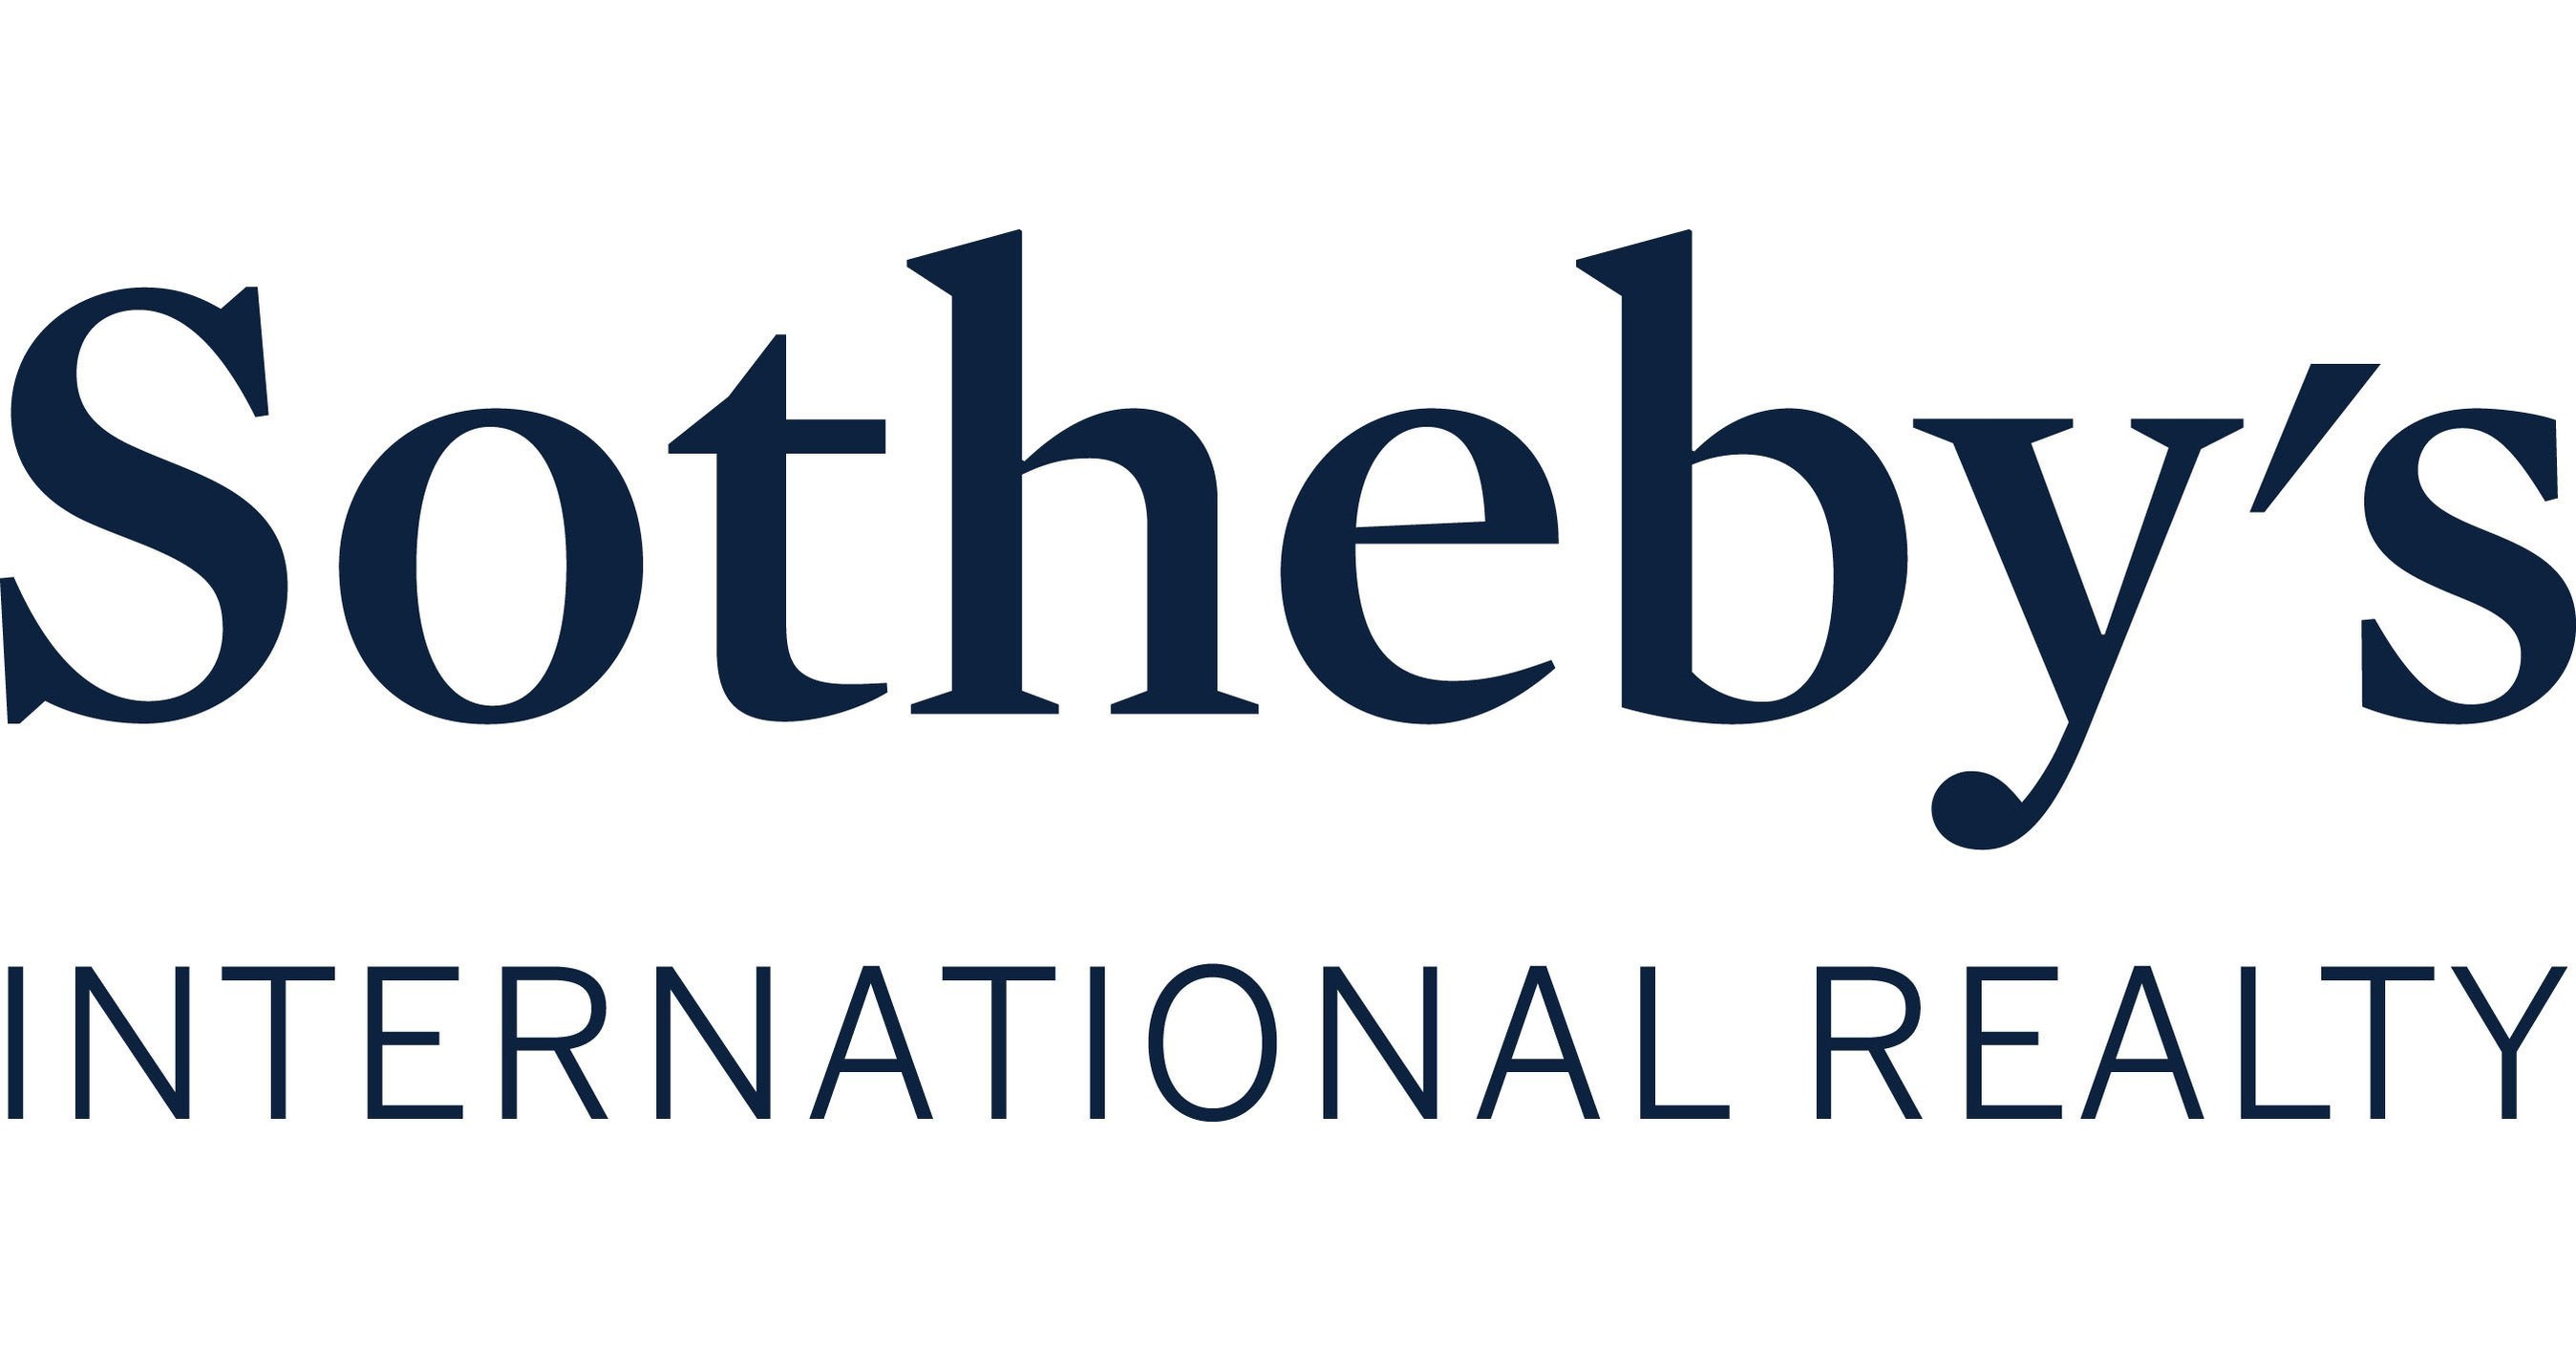 Sotheby's International Realty Brand Opens 125th European Office with Expansion into Slovakia